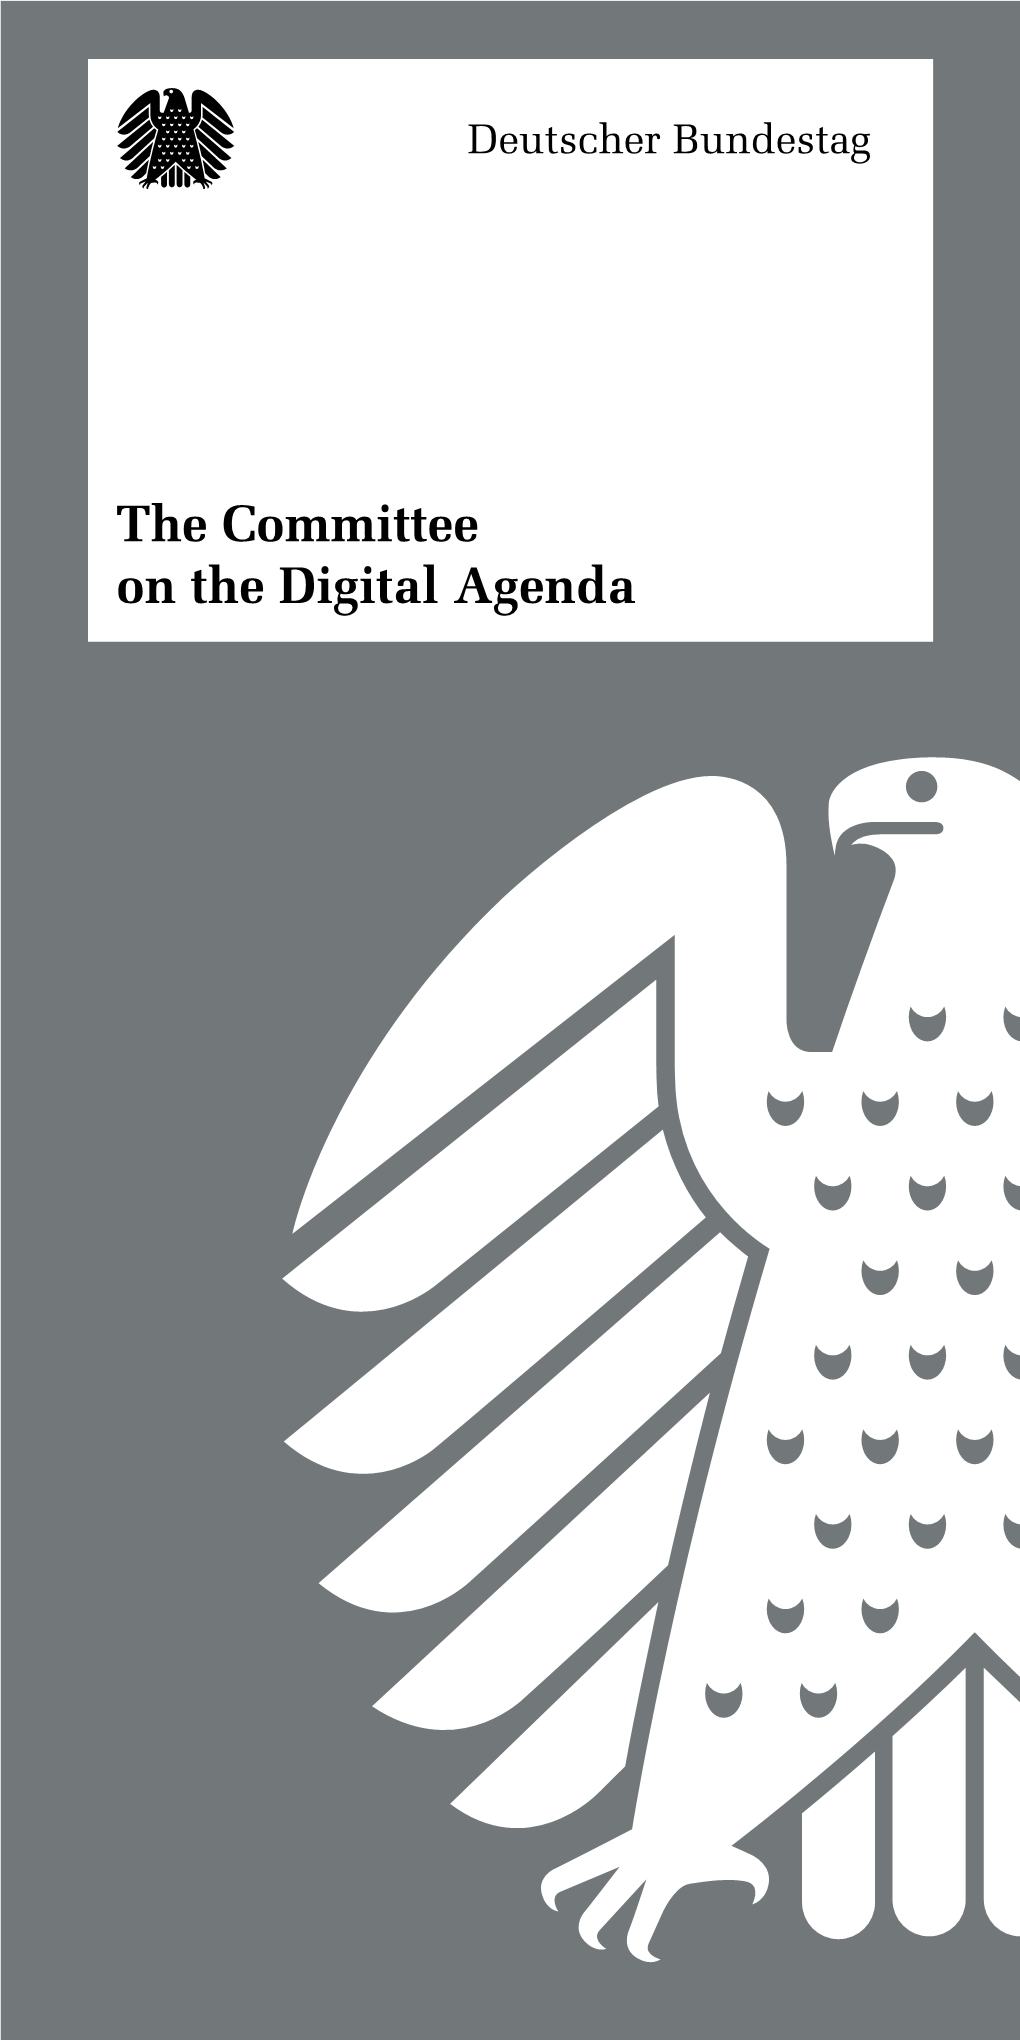 The Committee on the Digital Agenda